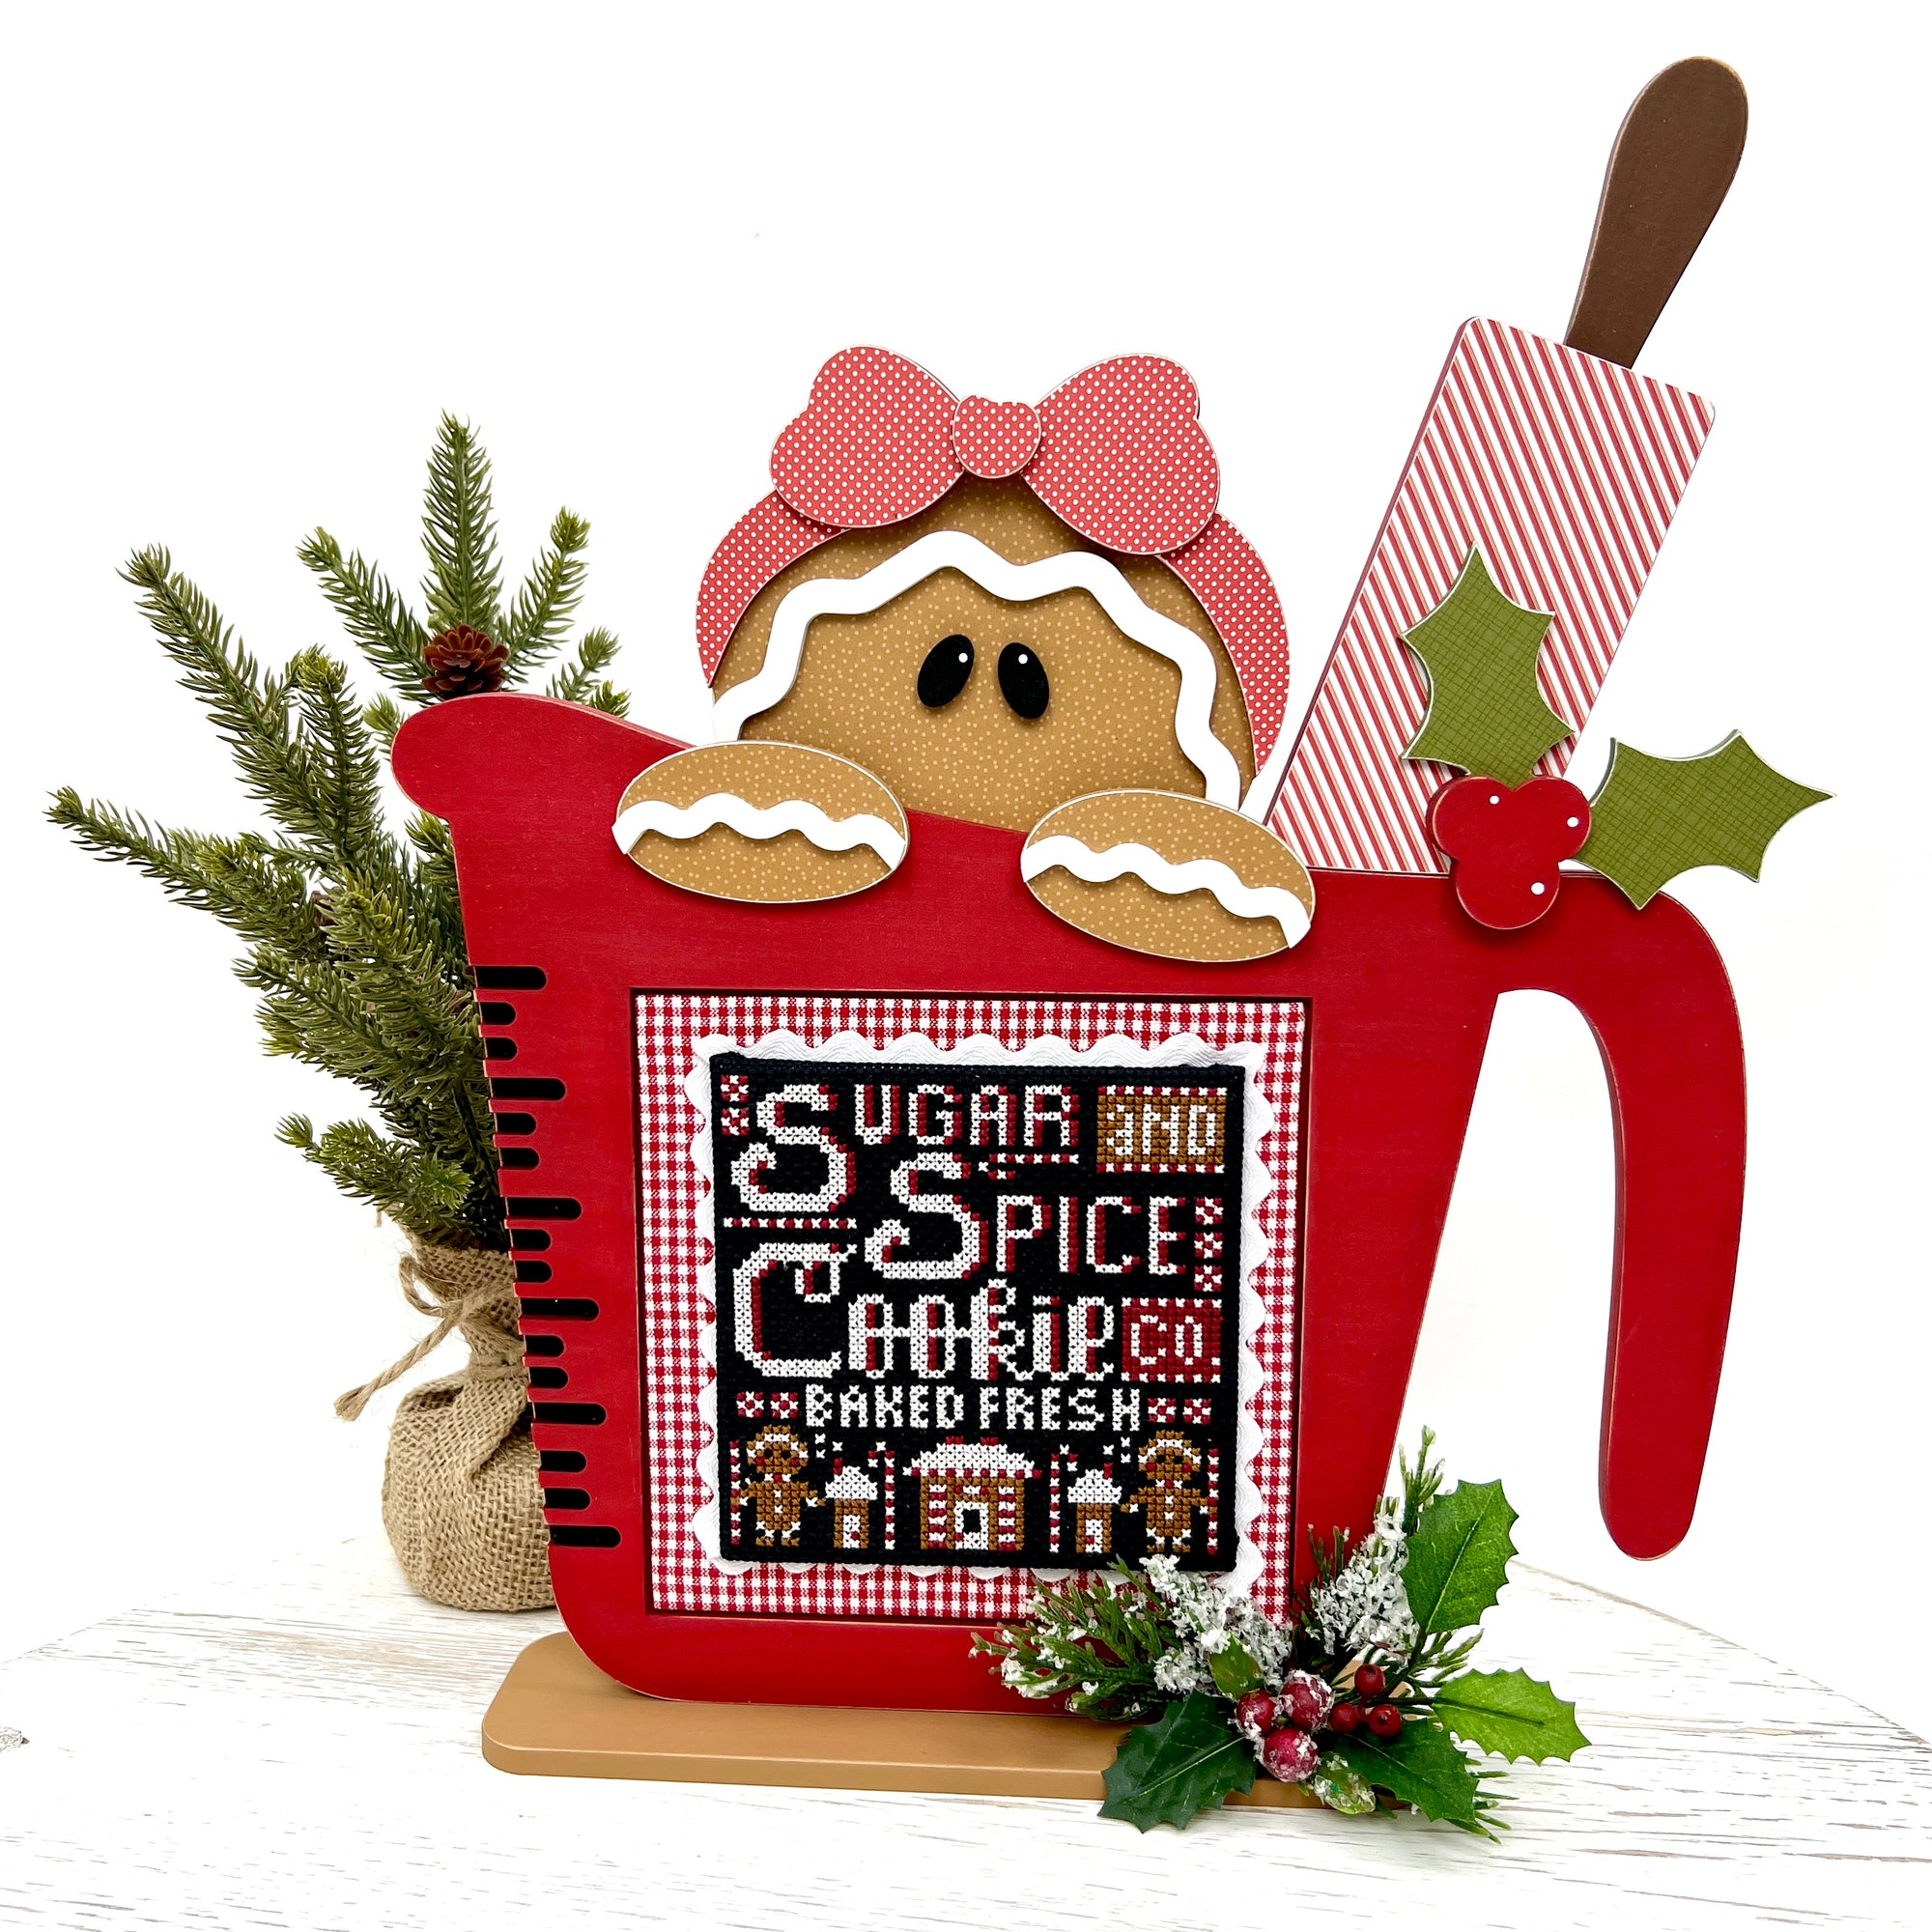 Unfinished Wood Gingerbread Cross Stitch Display